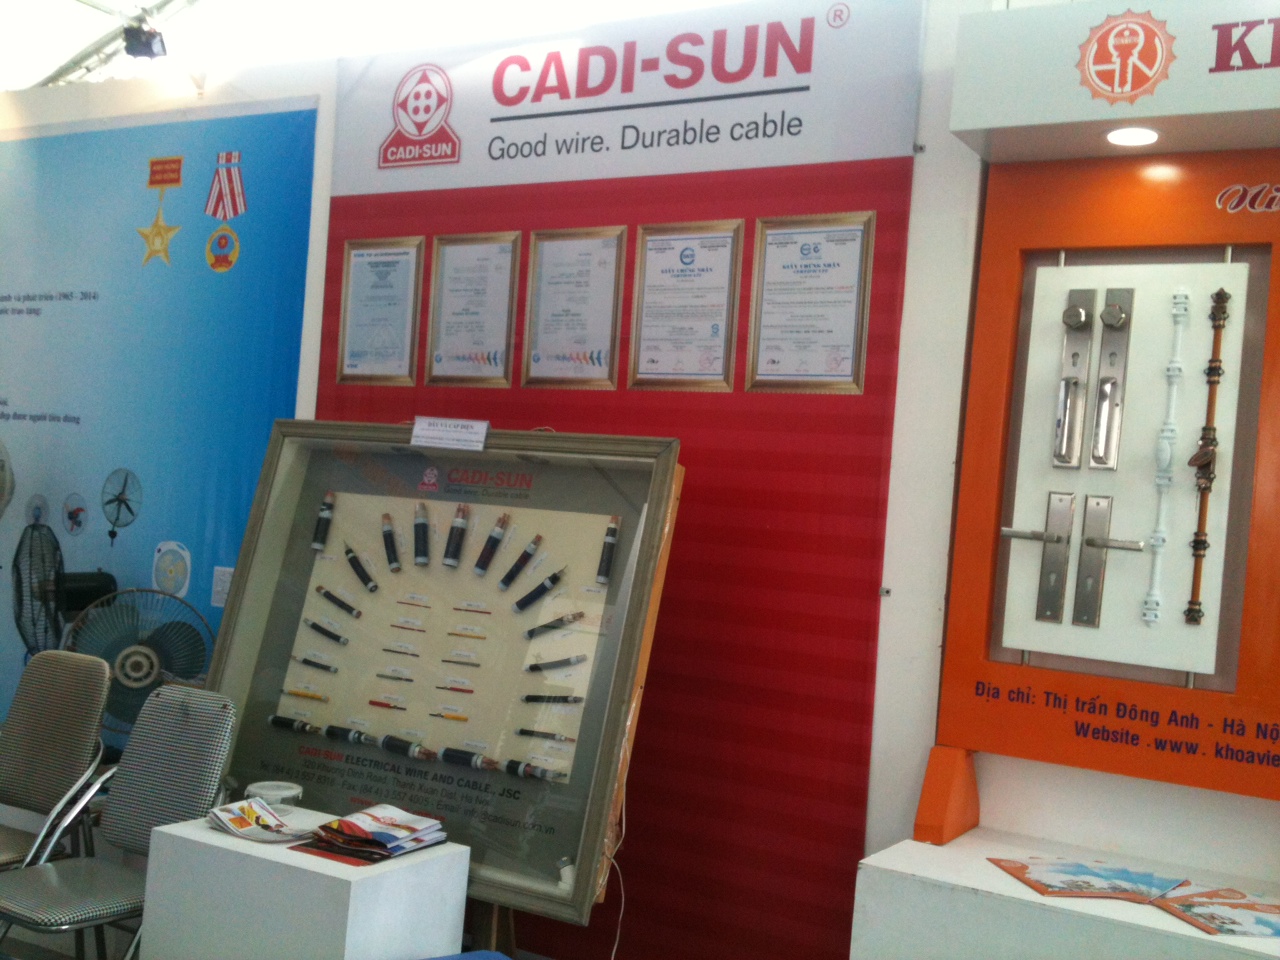 CADI-SUN take part in Exhibition on Economic - Cultural - Social Achievements of Hanoi over 69 years